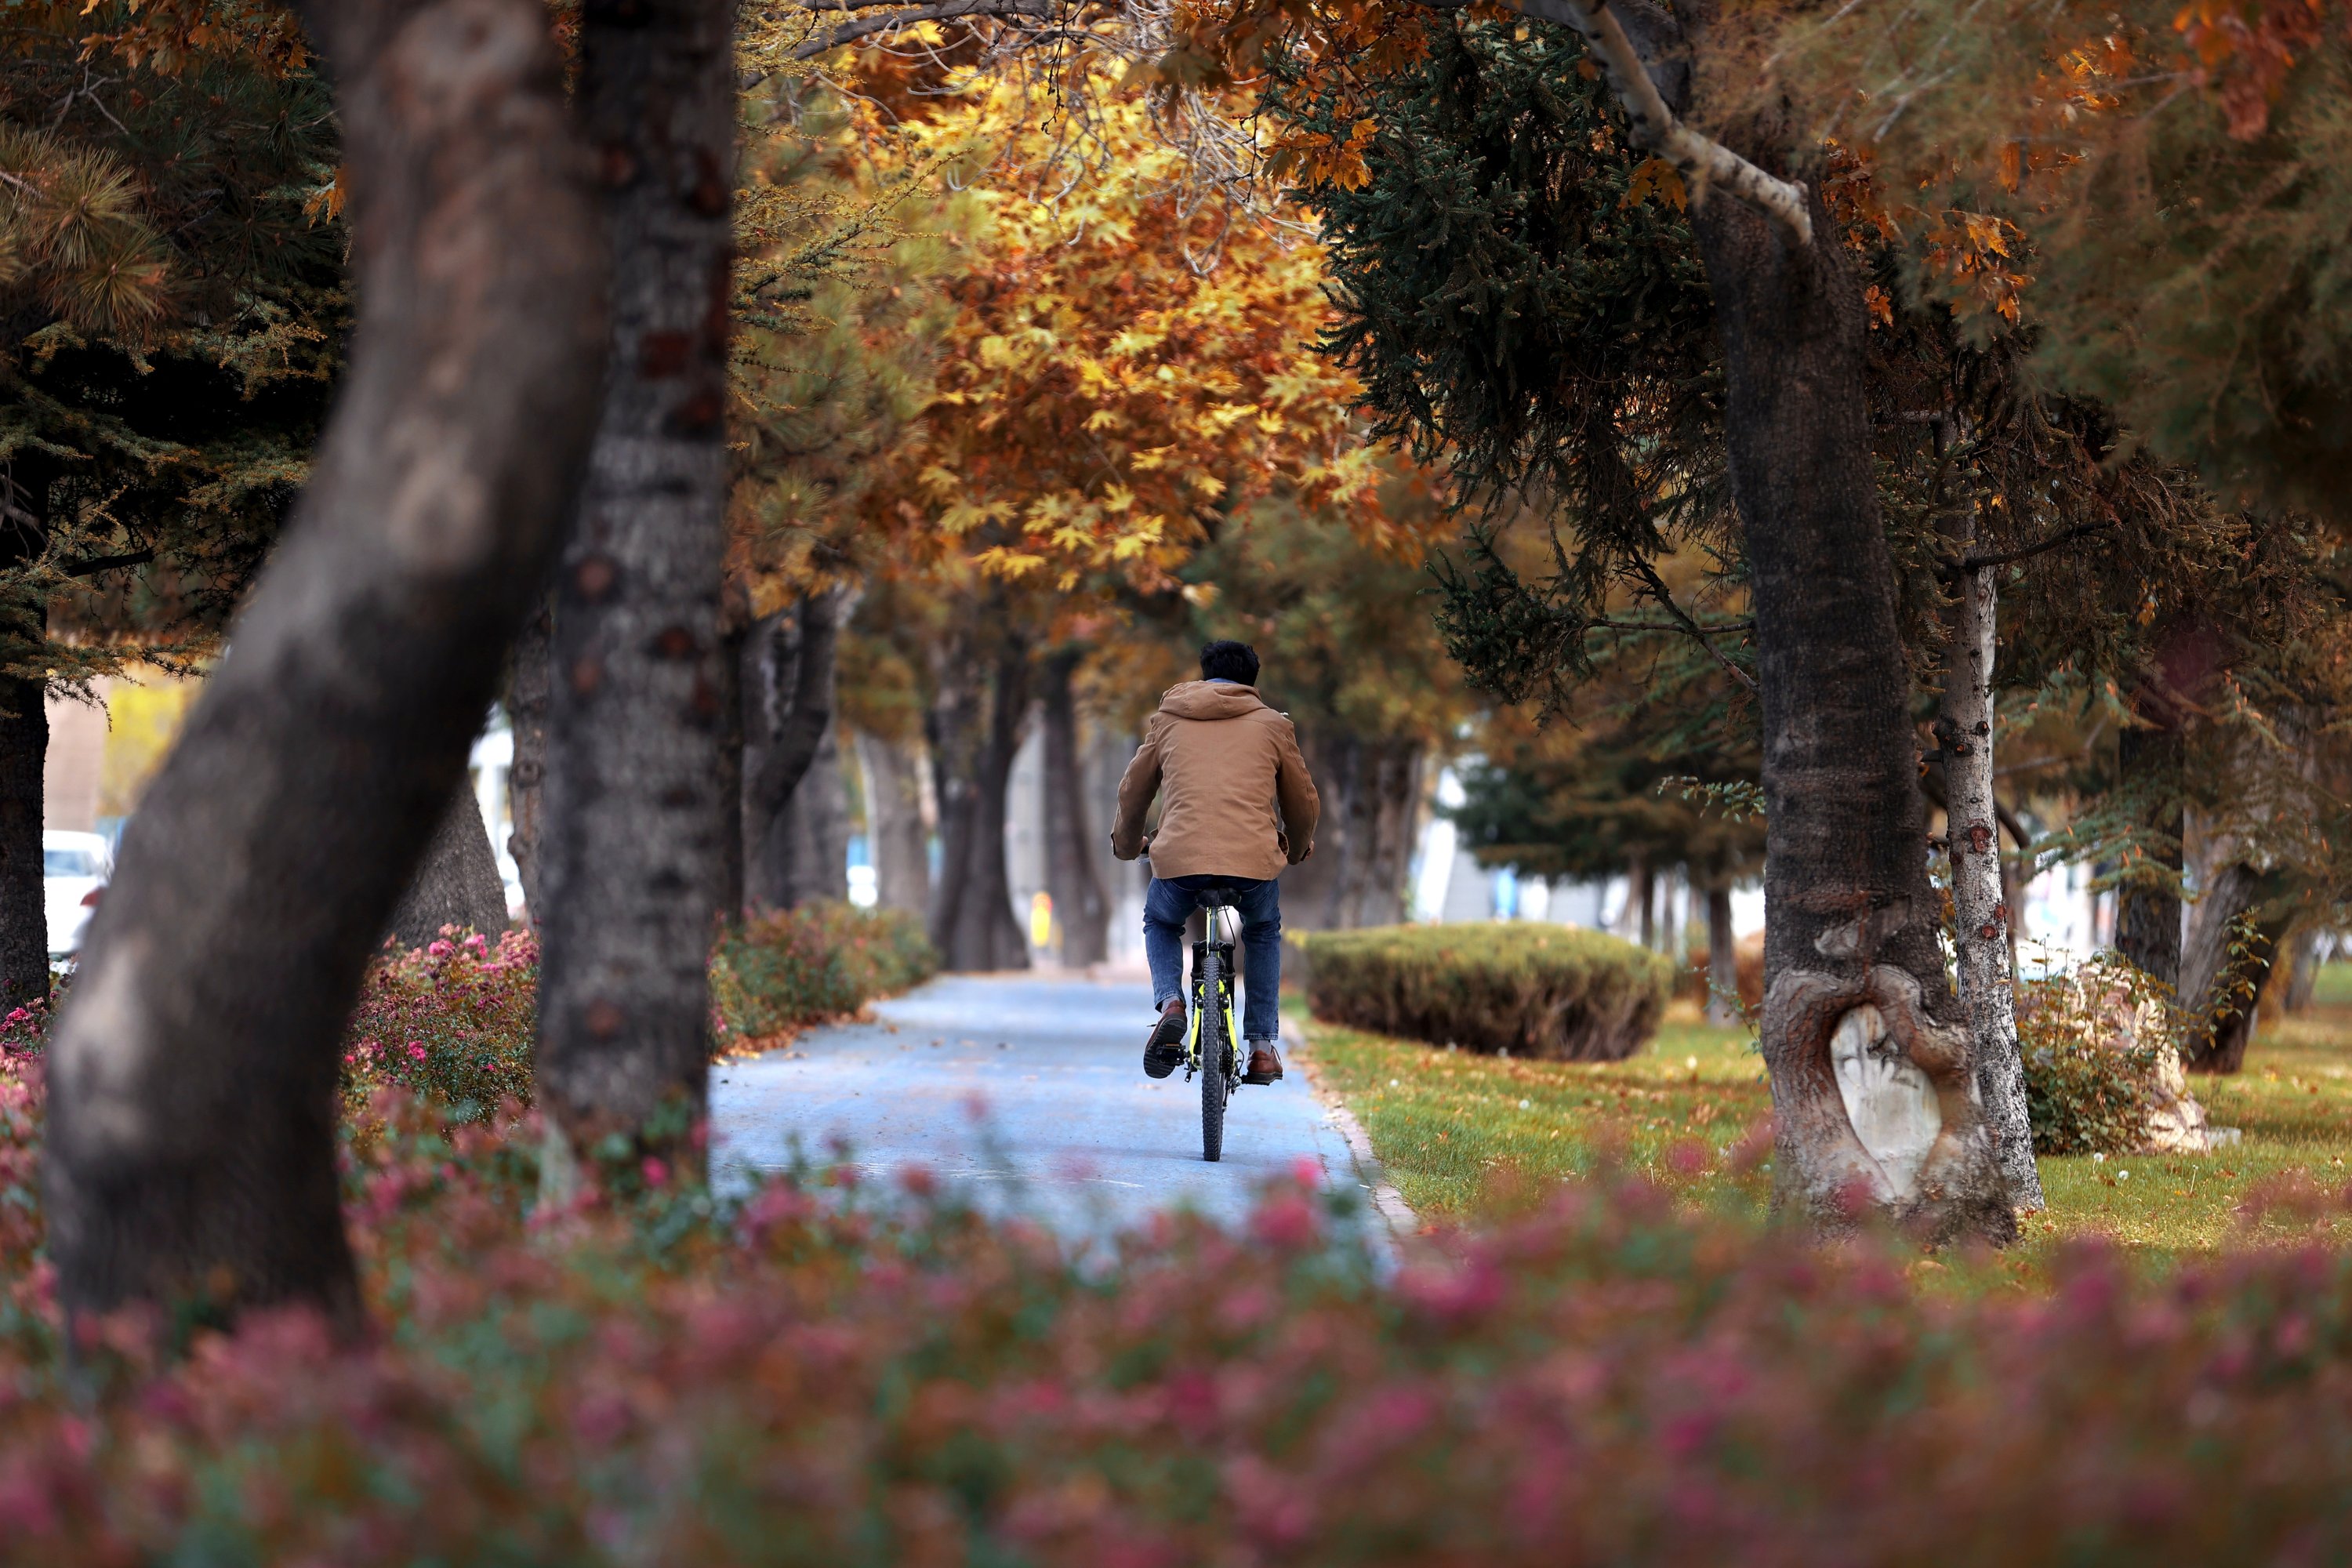 A man rides a bicycle on a bicycle lane in Konya, central Turkey, Oct. 22, 2021. (AA PHOTO)